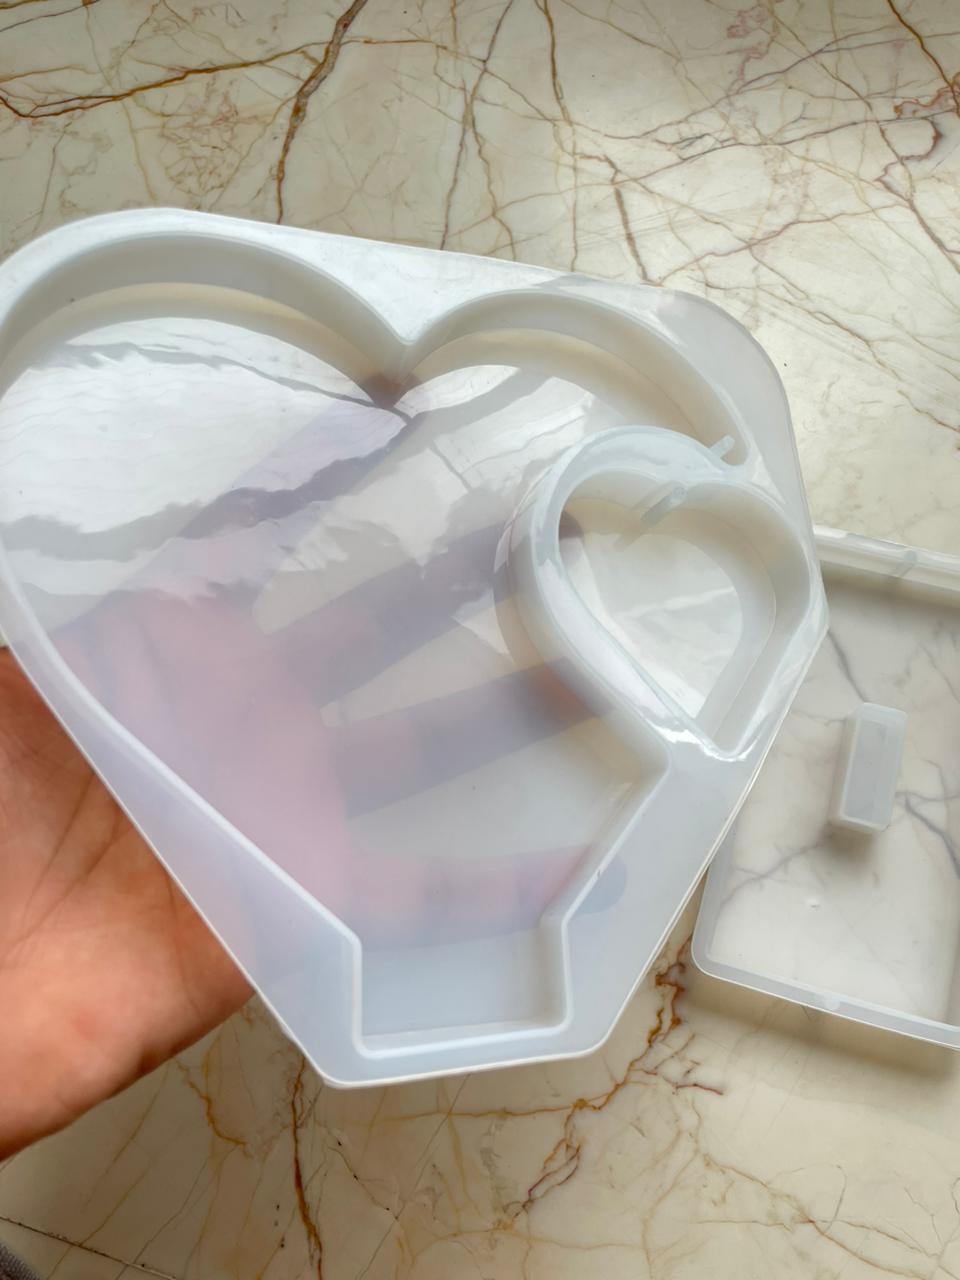 Heart with heart hanging Stand Photo Frame mould